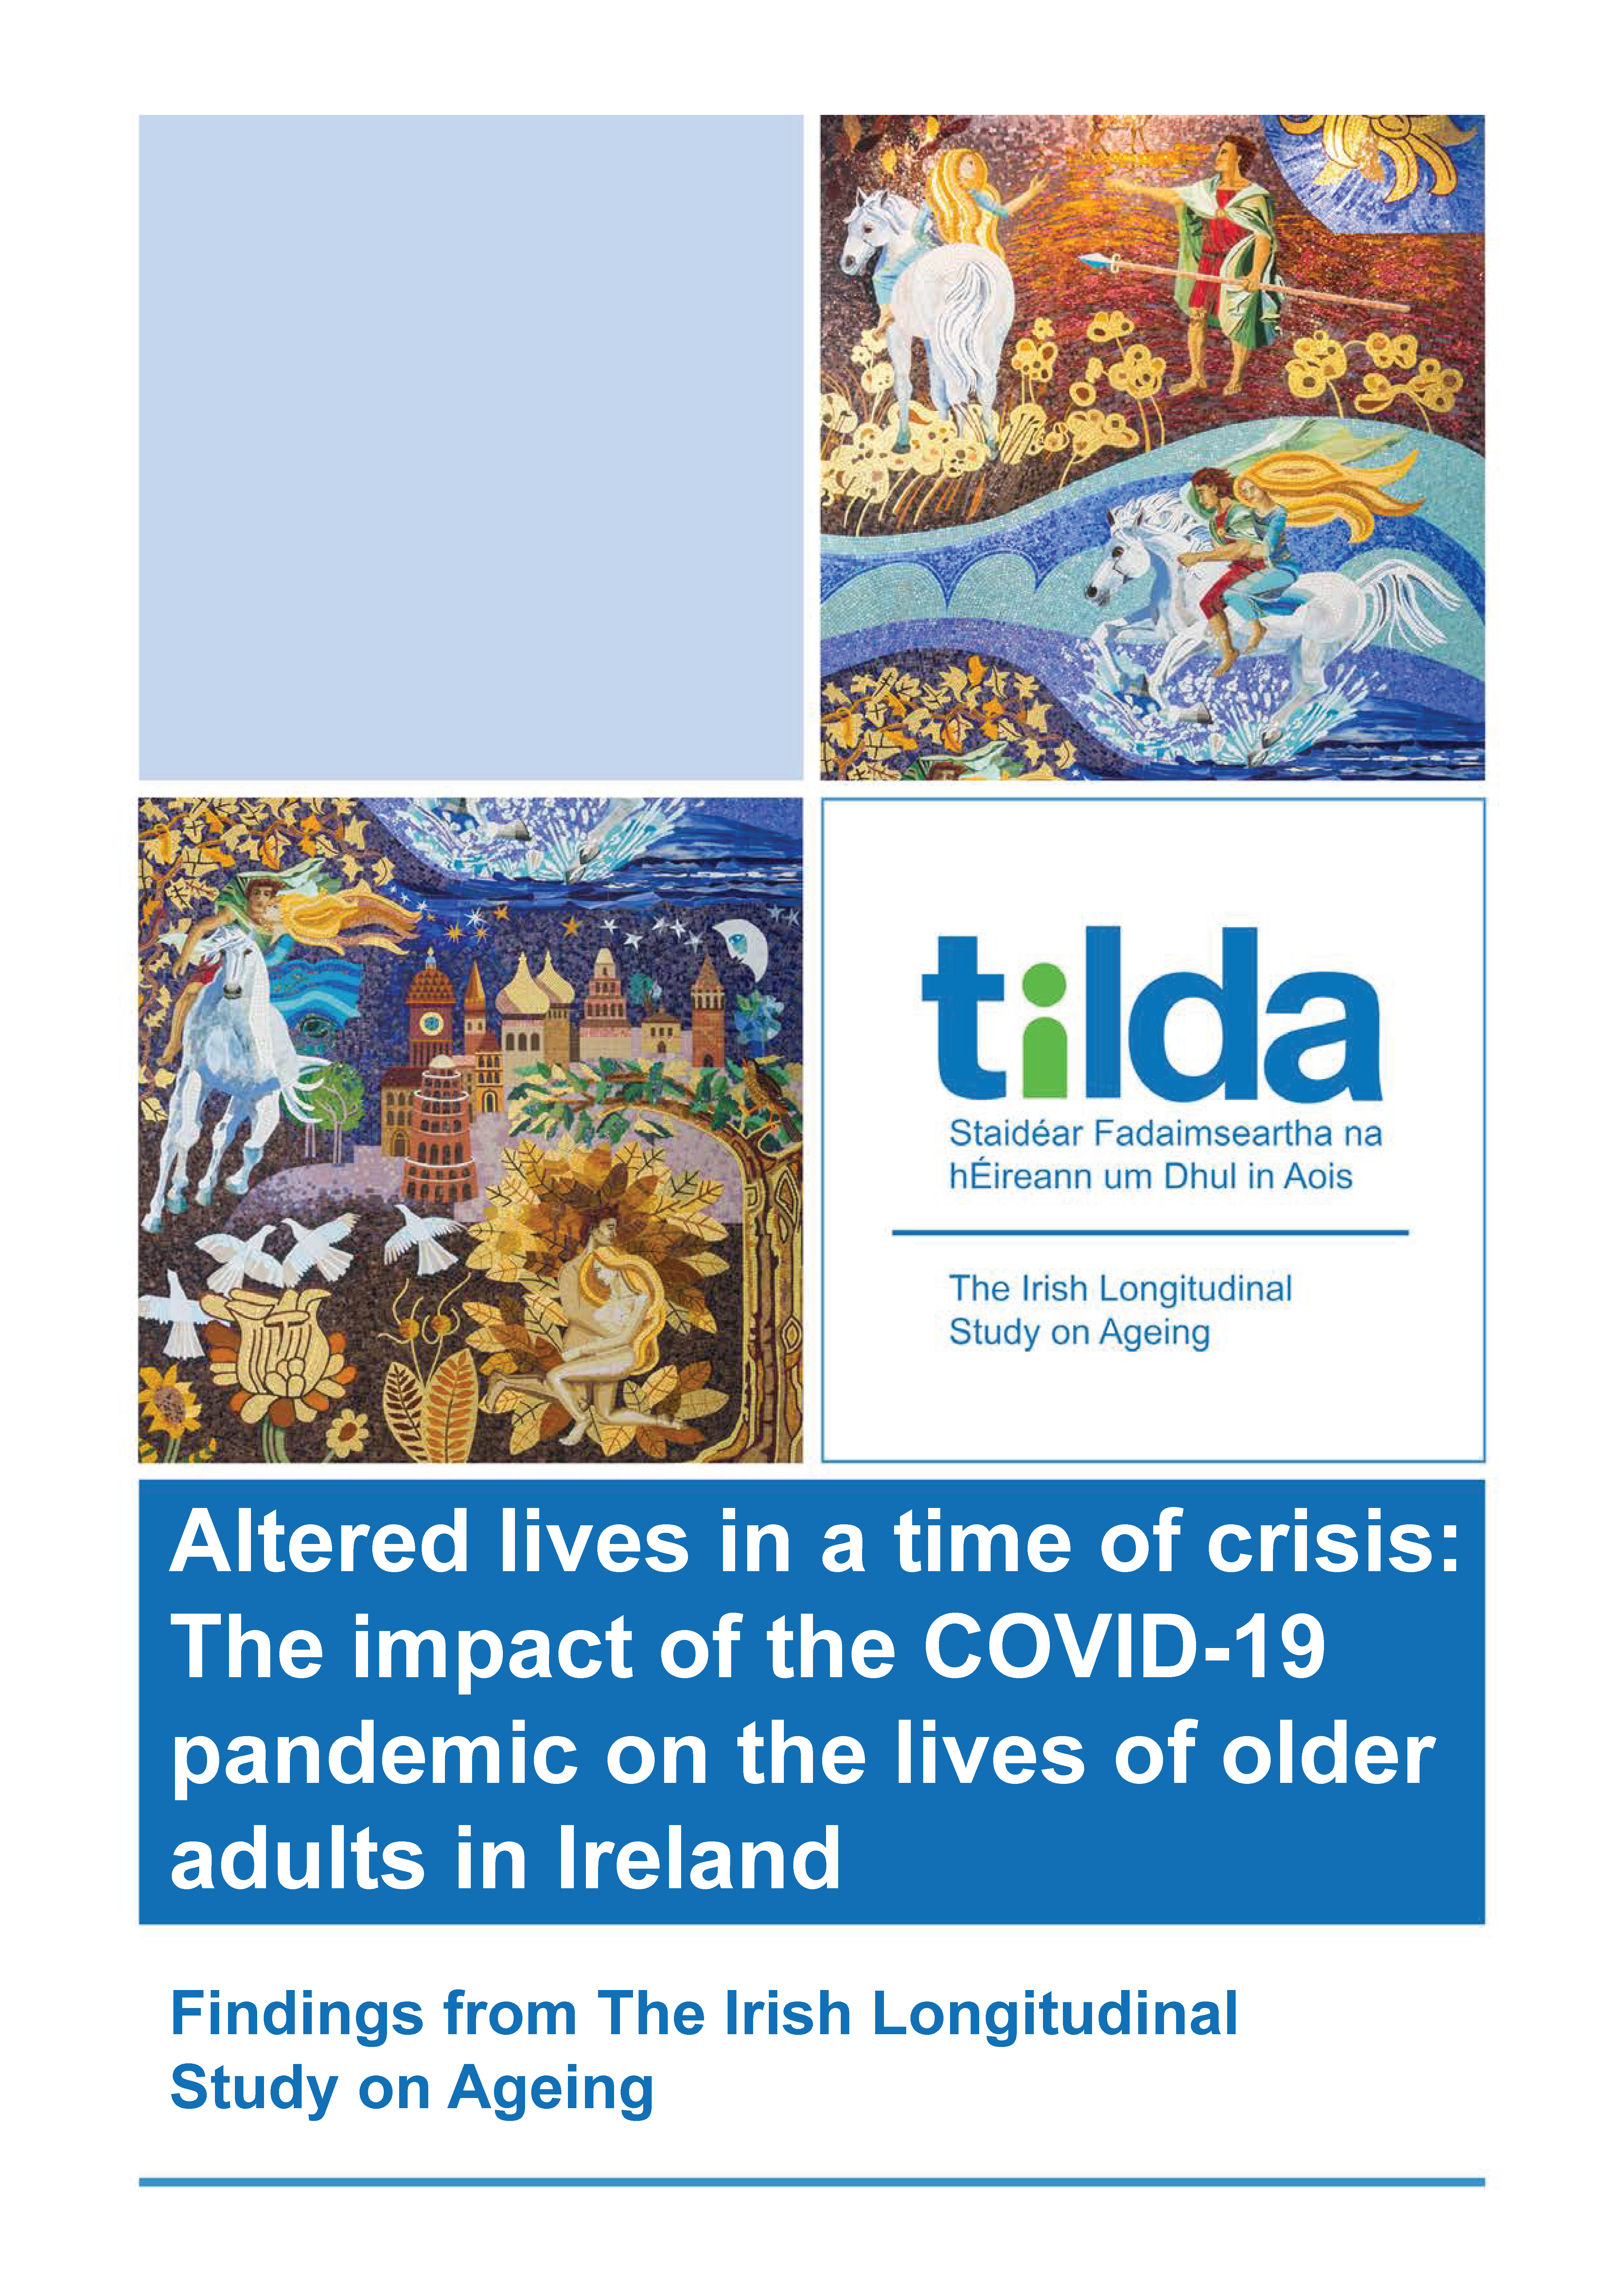 ALTERED LIVES IN A TIME OF CRISIS: THE IMPACT OF THE COVID-19 PANDEMIC ON THE LIVES OF OLDER ADULTS IN IRELAND